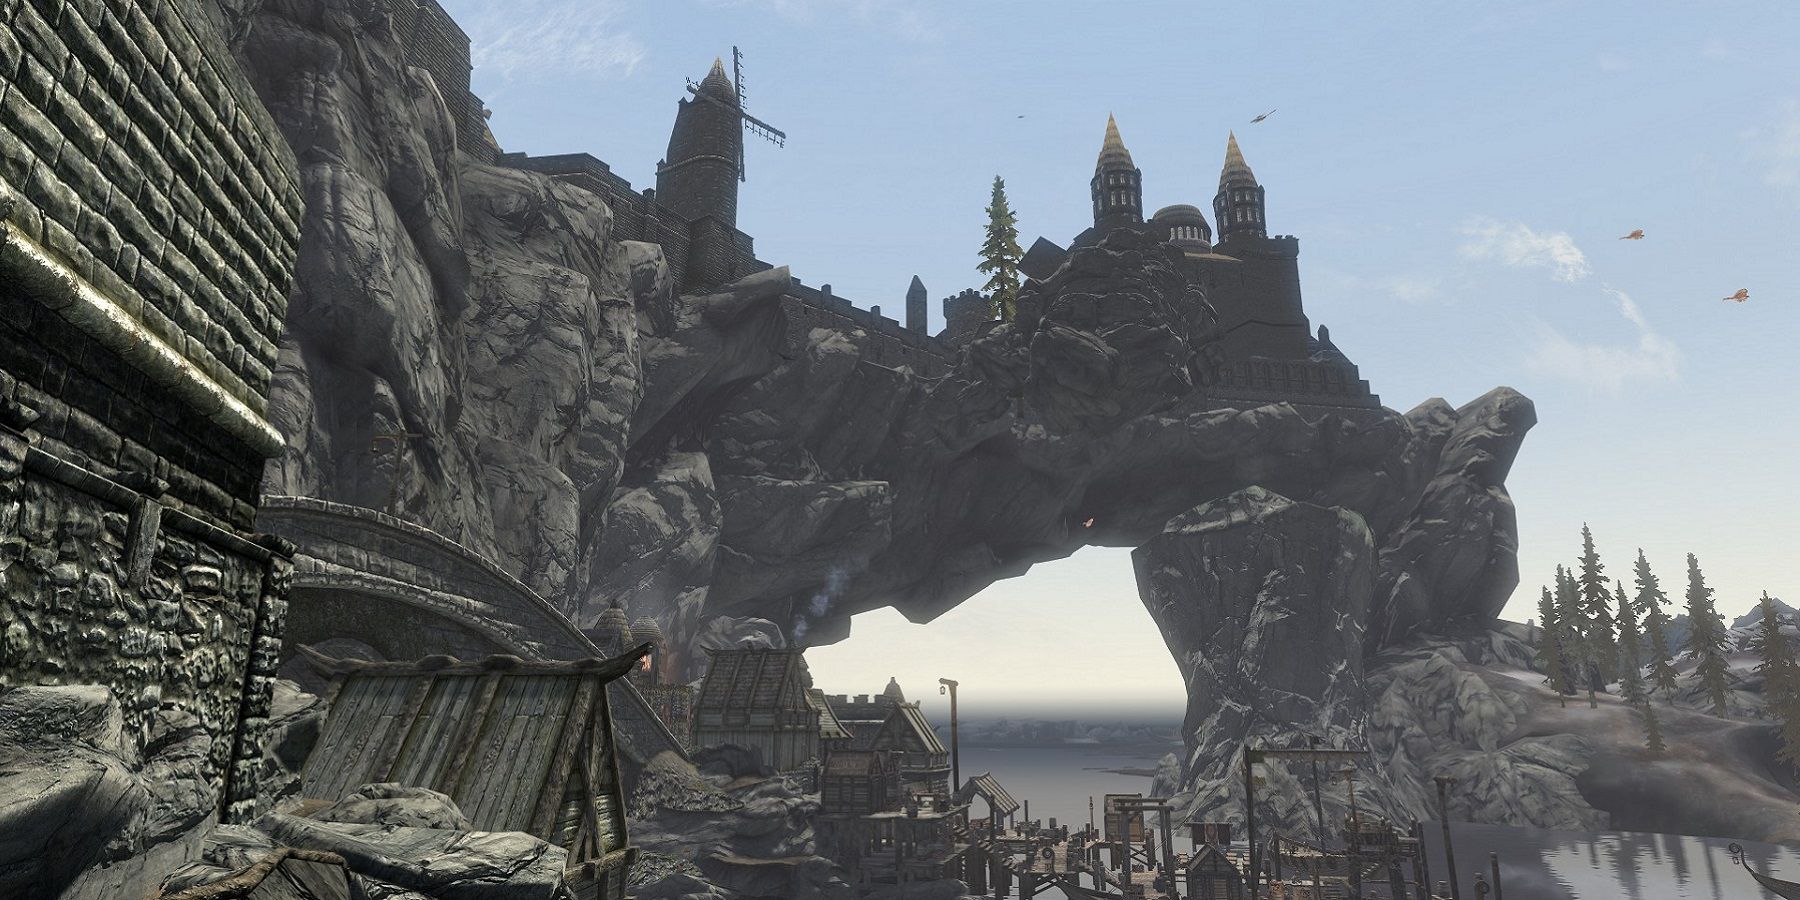 A screenshot from Skyrim outside the city of Solitude showing the arched cape that goes over the river.